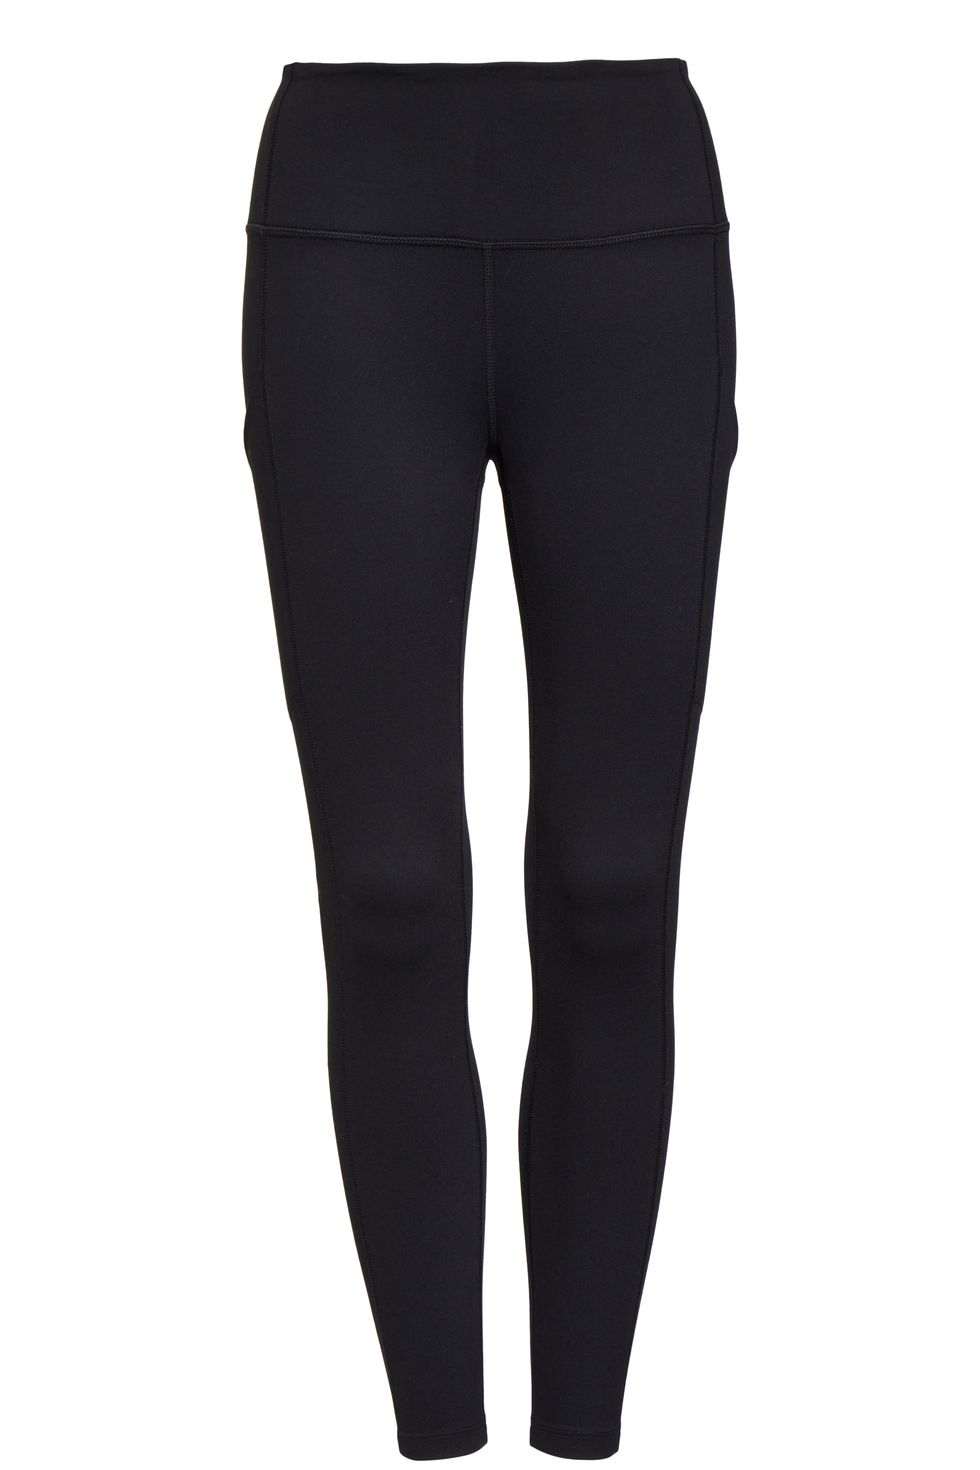 10 Best Workout Leggings With Pockets - Leggings With Pockets